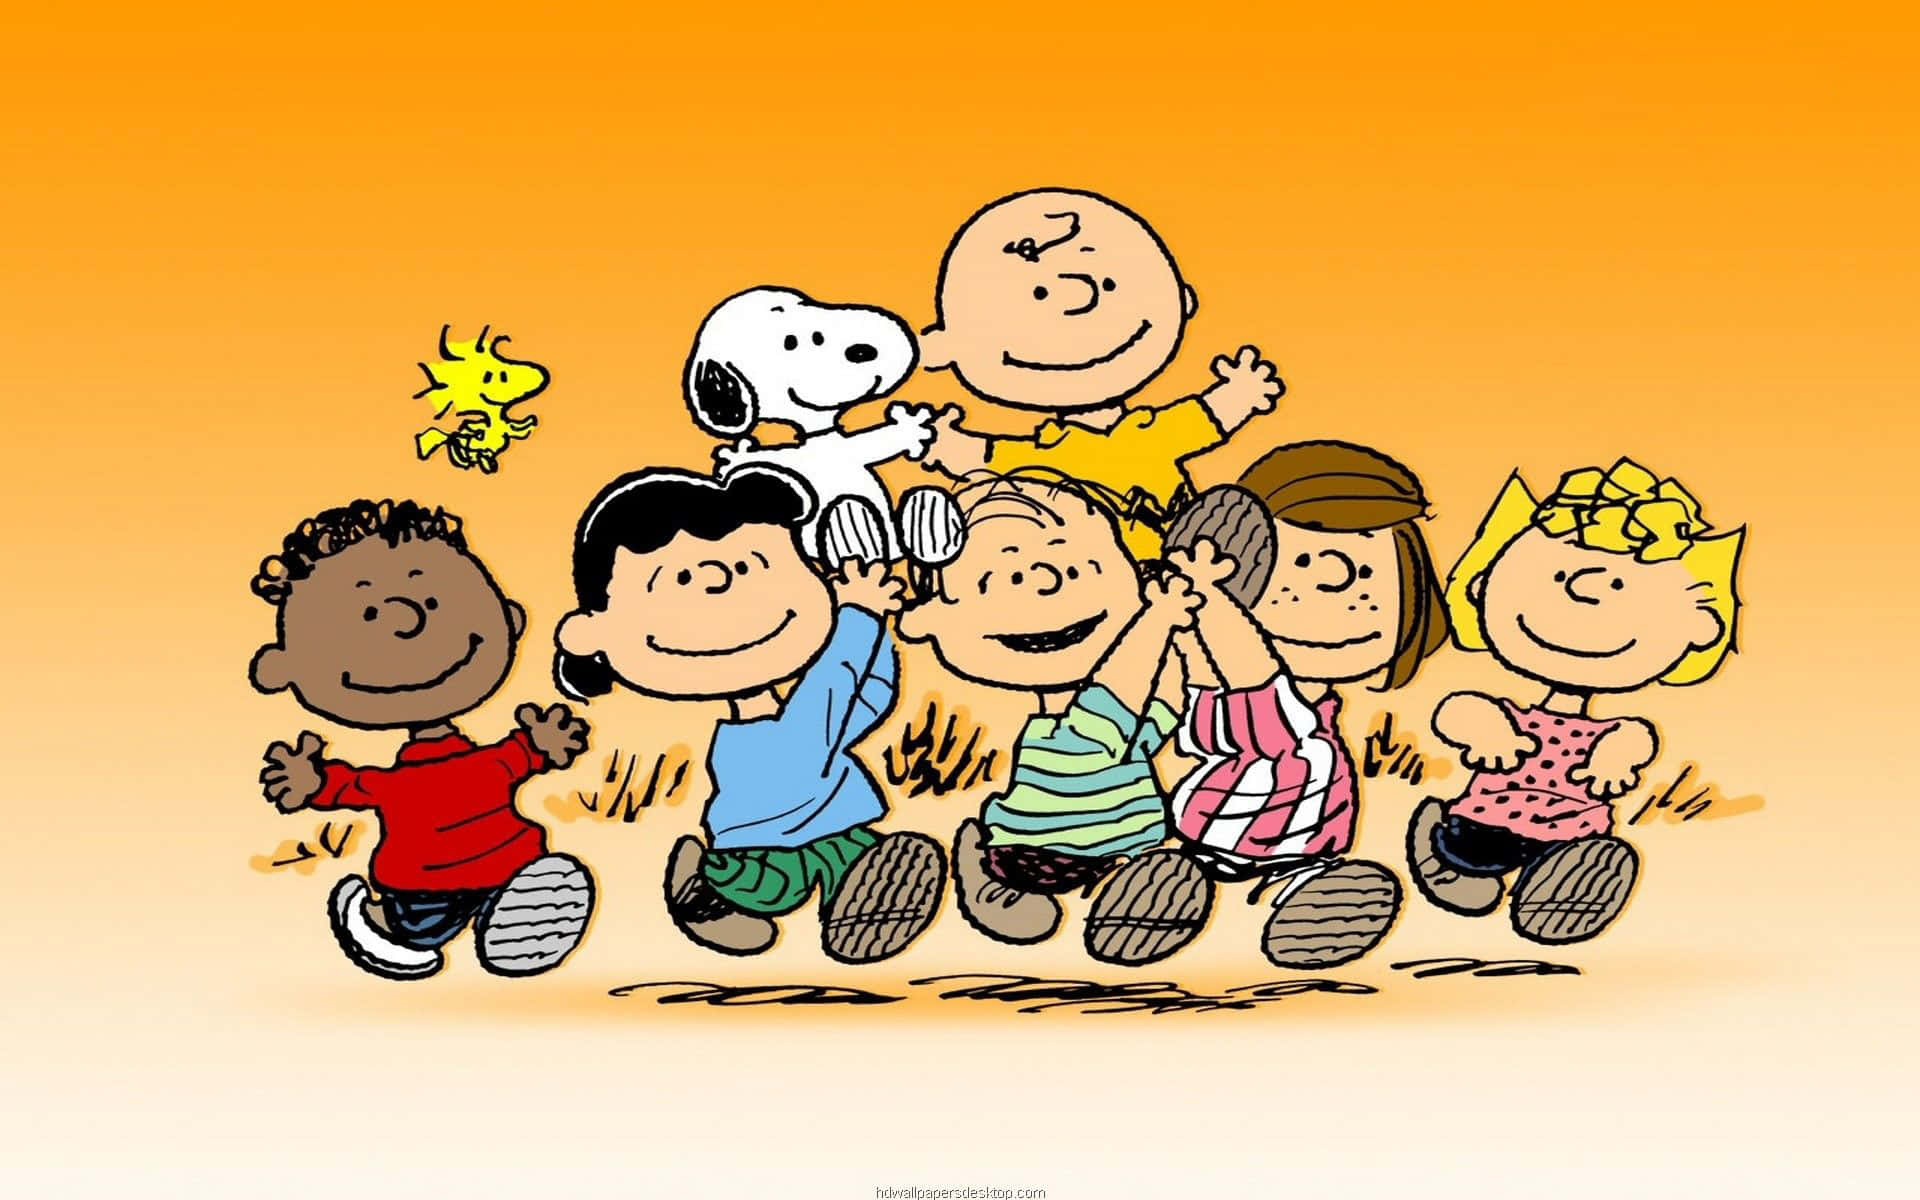 Charlie Brown and friends in a line, with Lucy, Schroeder, Linus, Snoopy, and Woodstock. - Charlie Brown